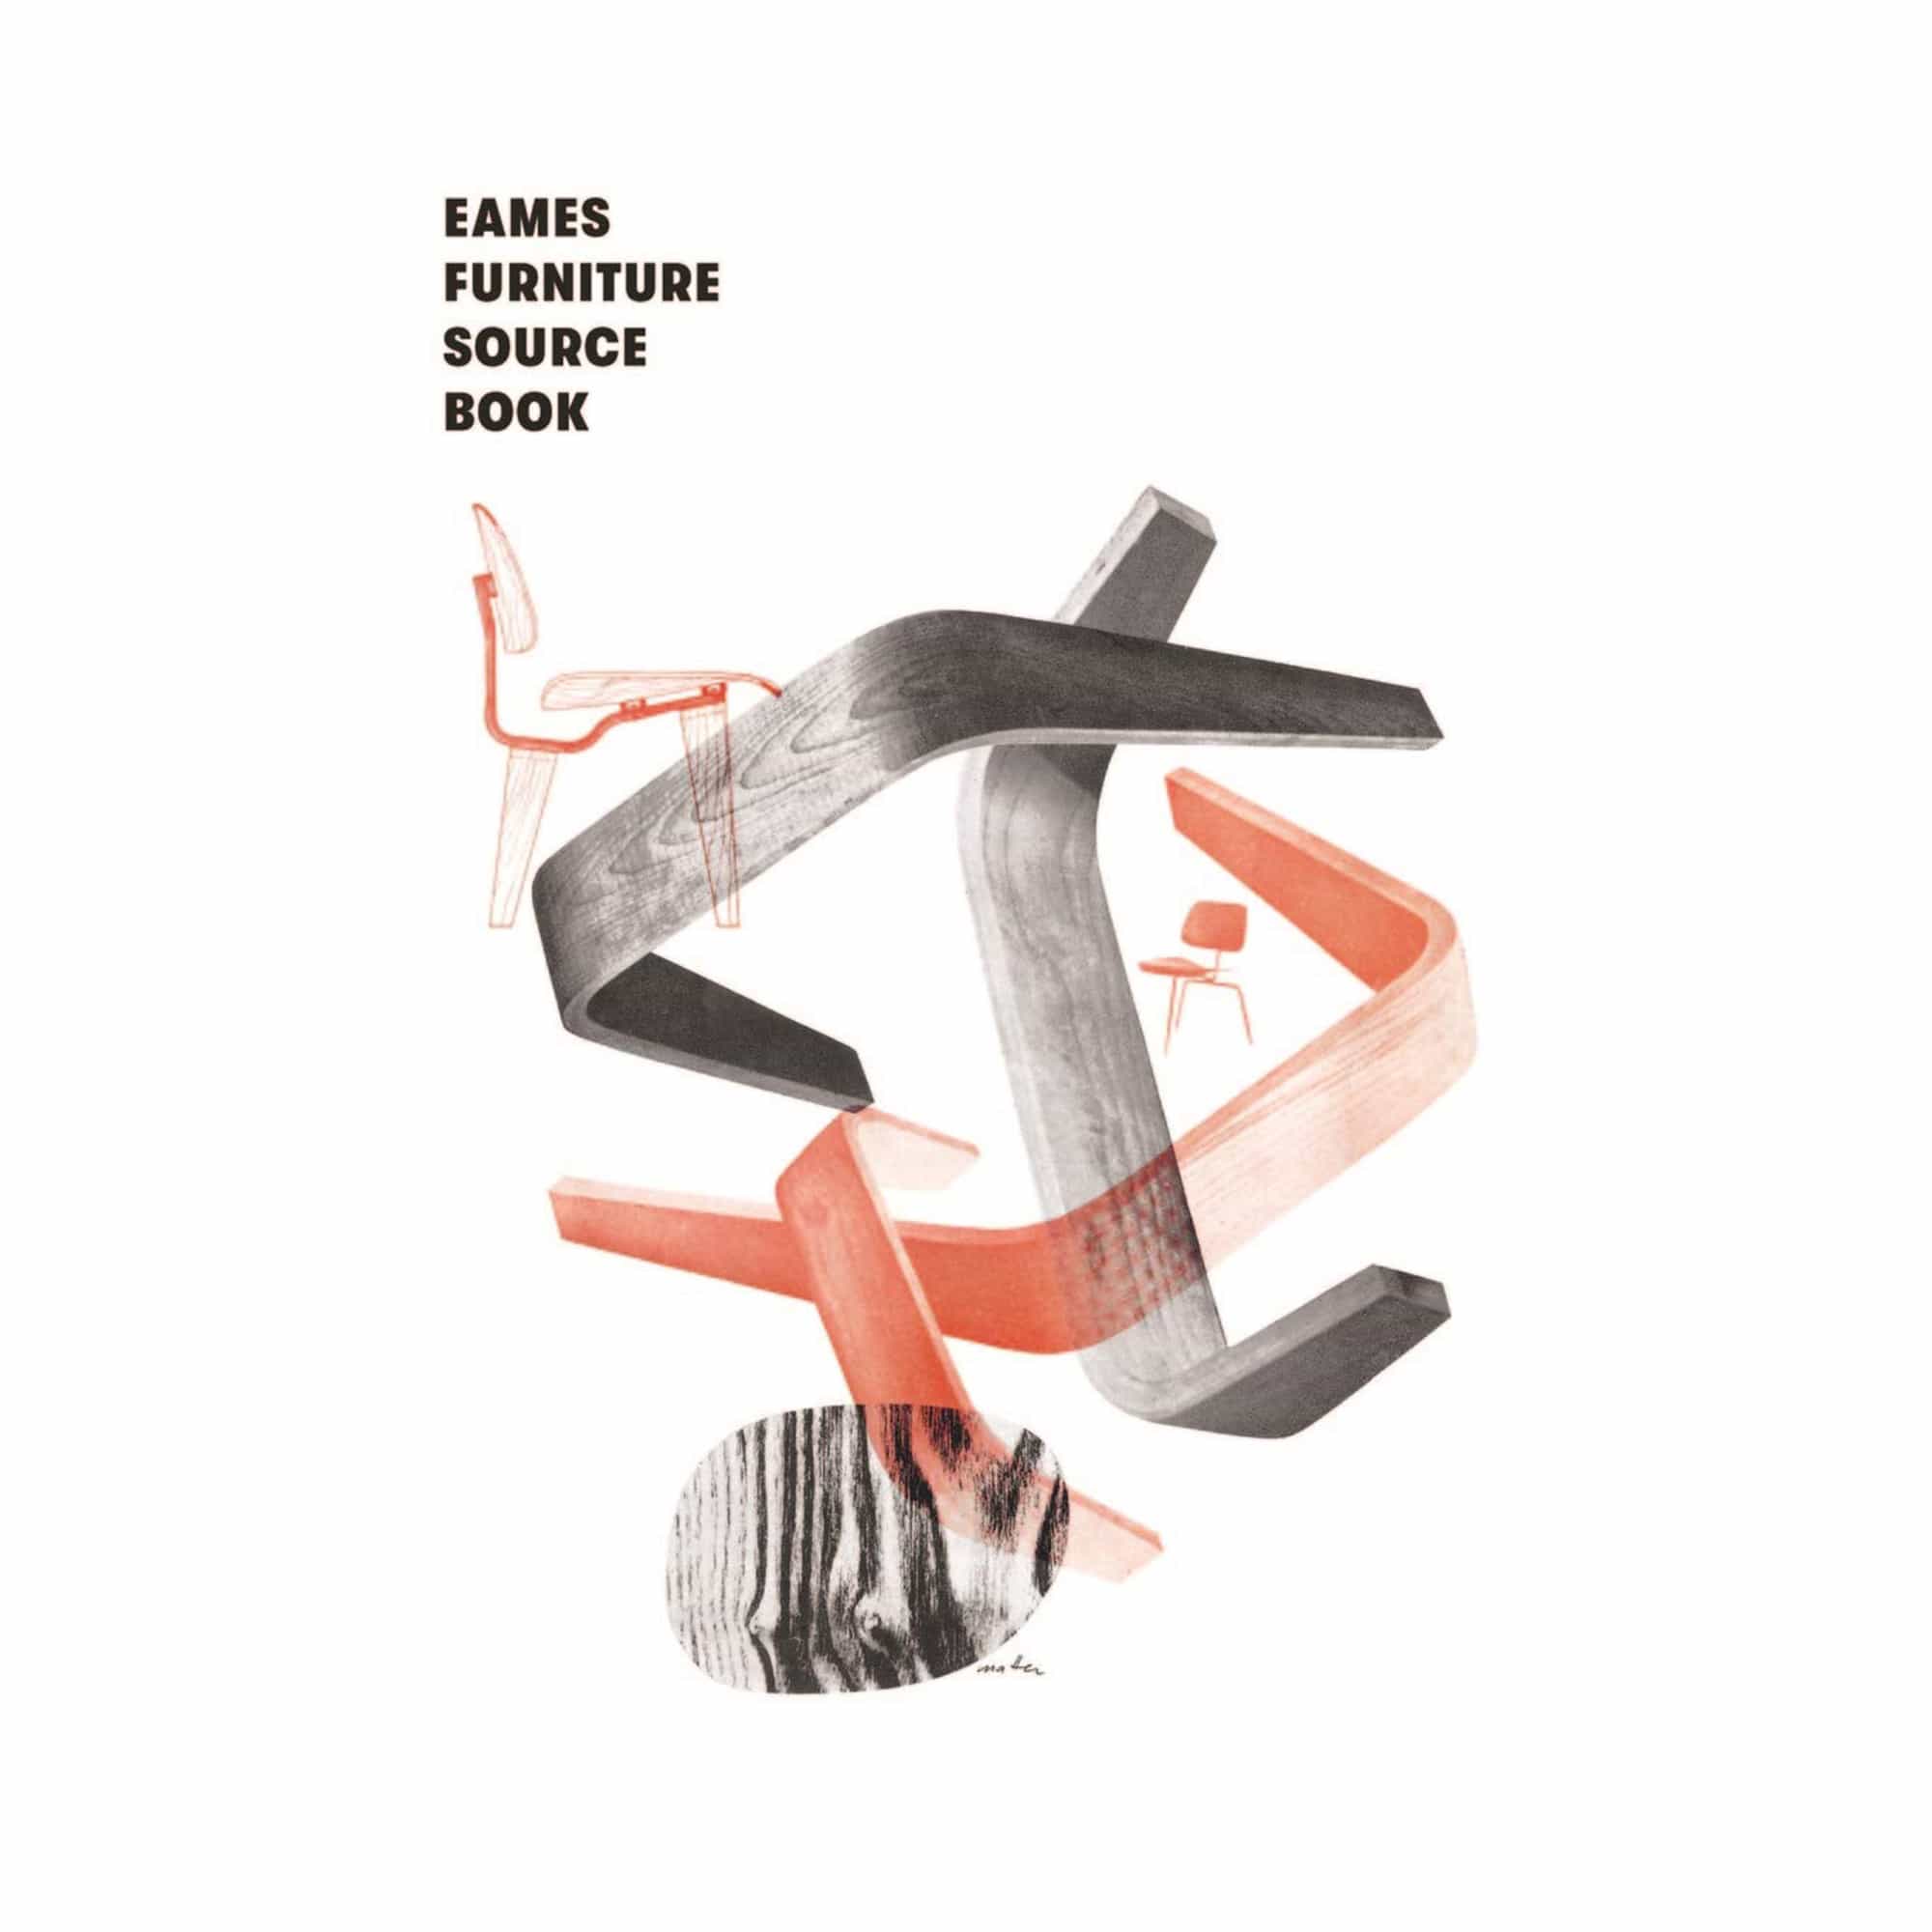 The Eames furniture sourcebook